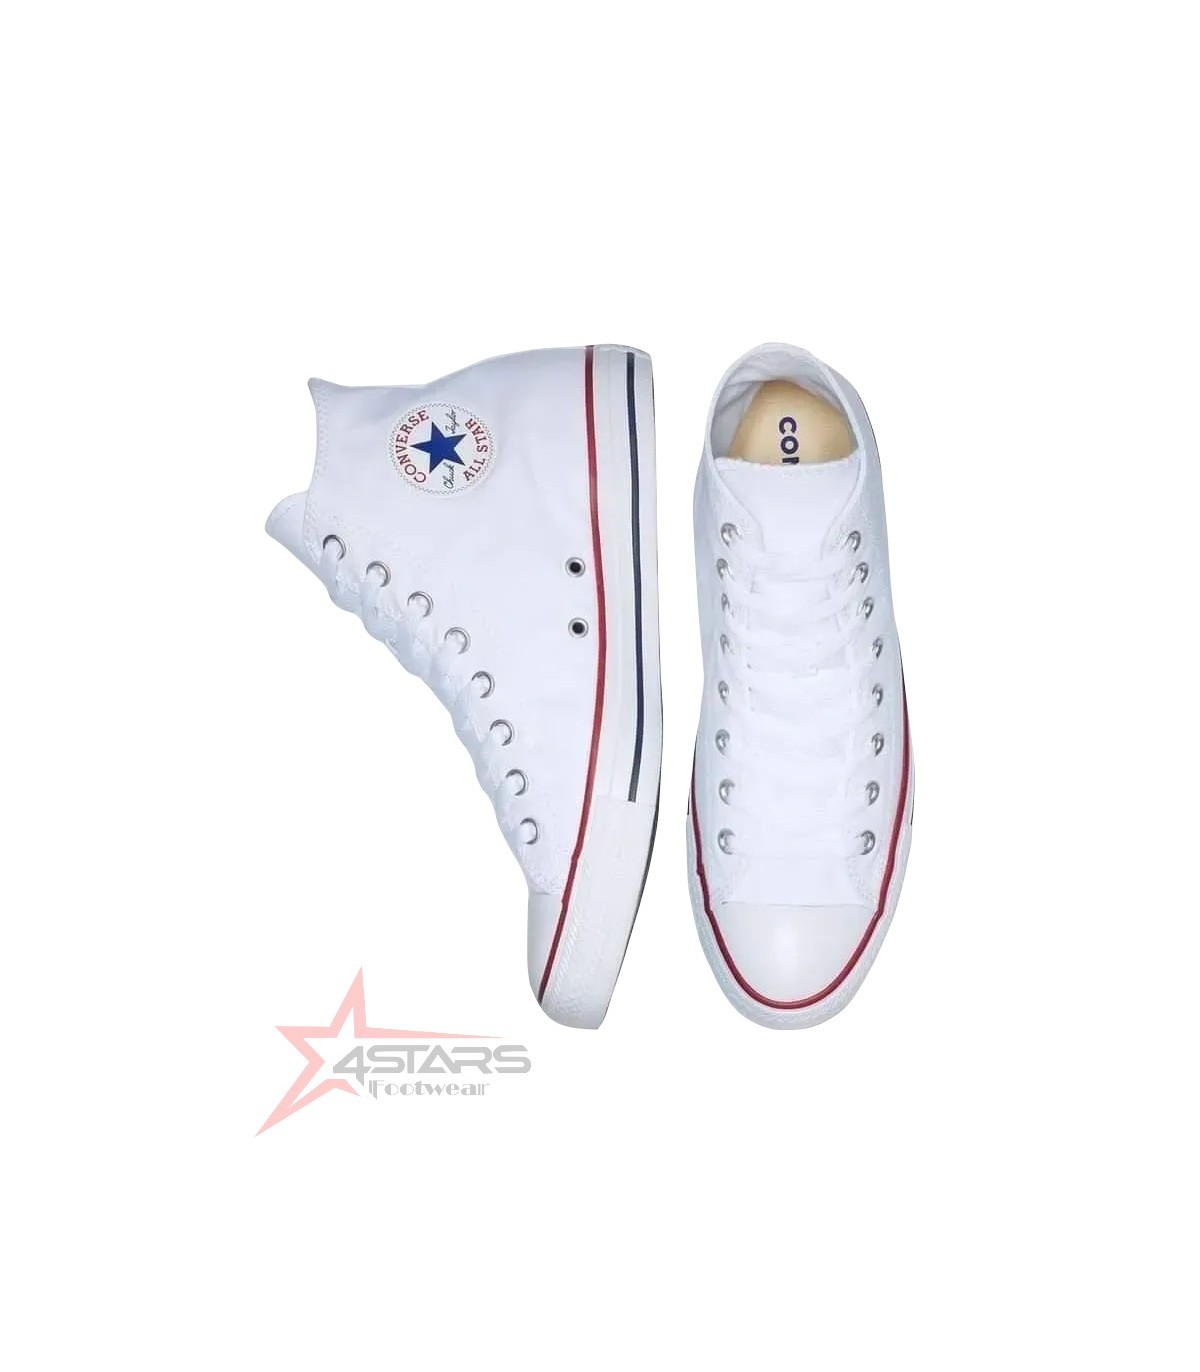 Converse All Star Sneakers in Kenya at the Best Prices